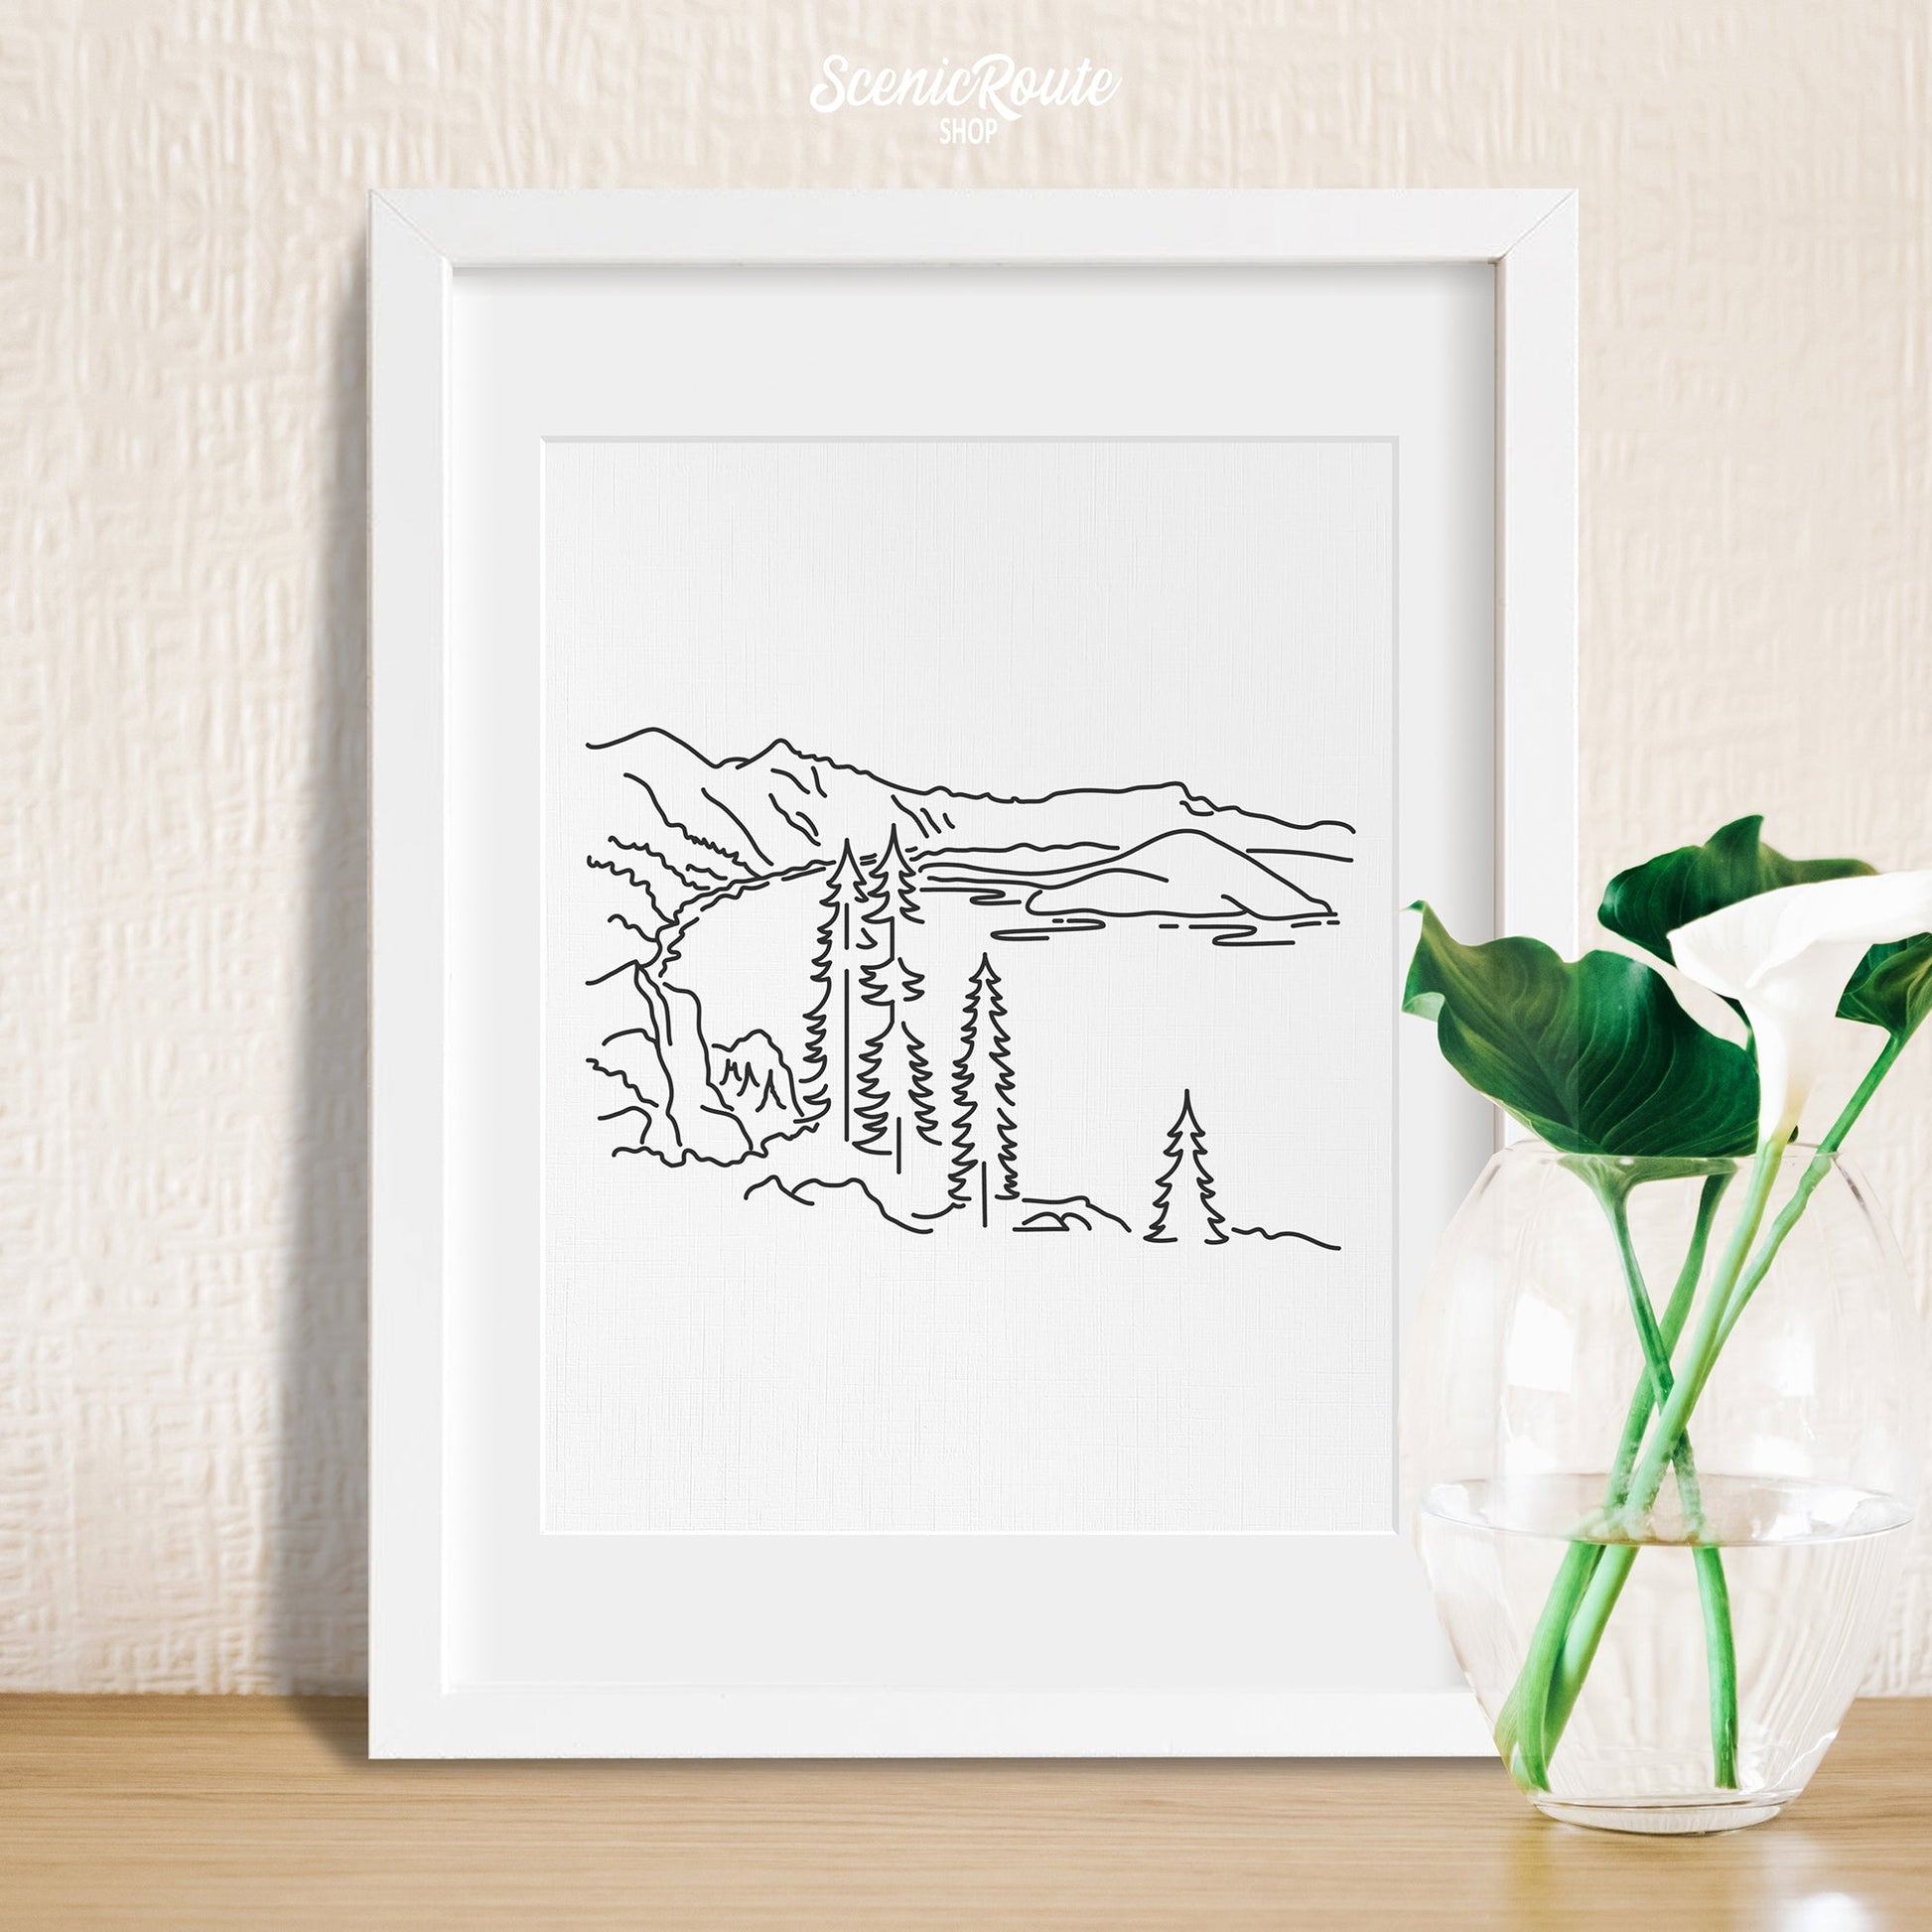 A framed line art drawing of Crater Lake National Park with a vase